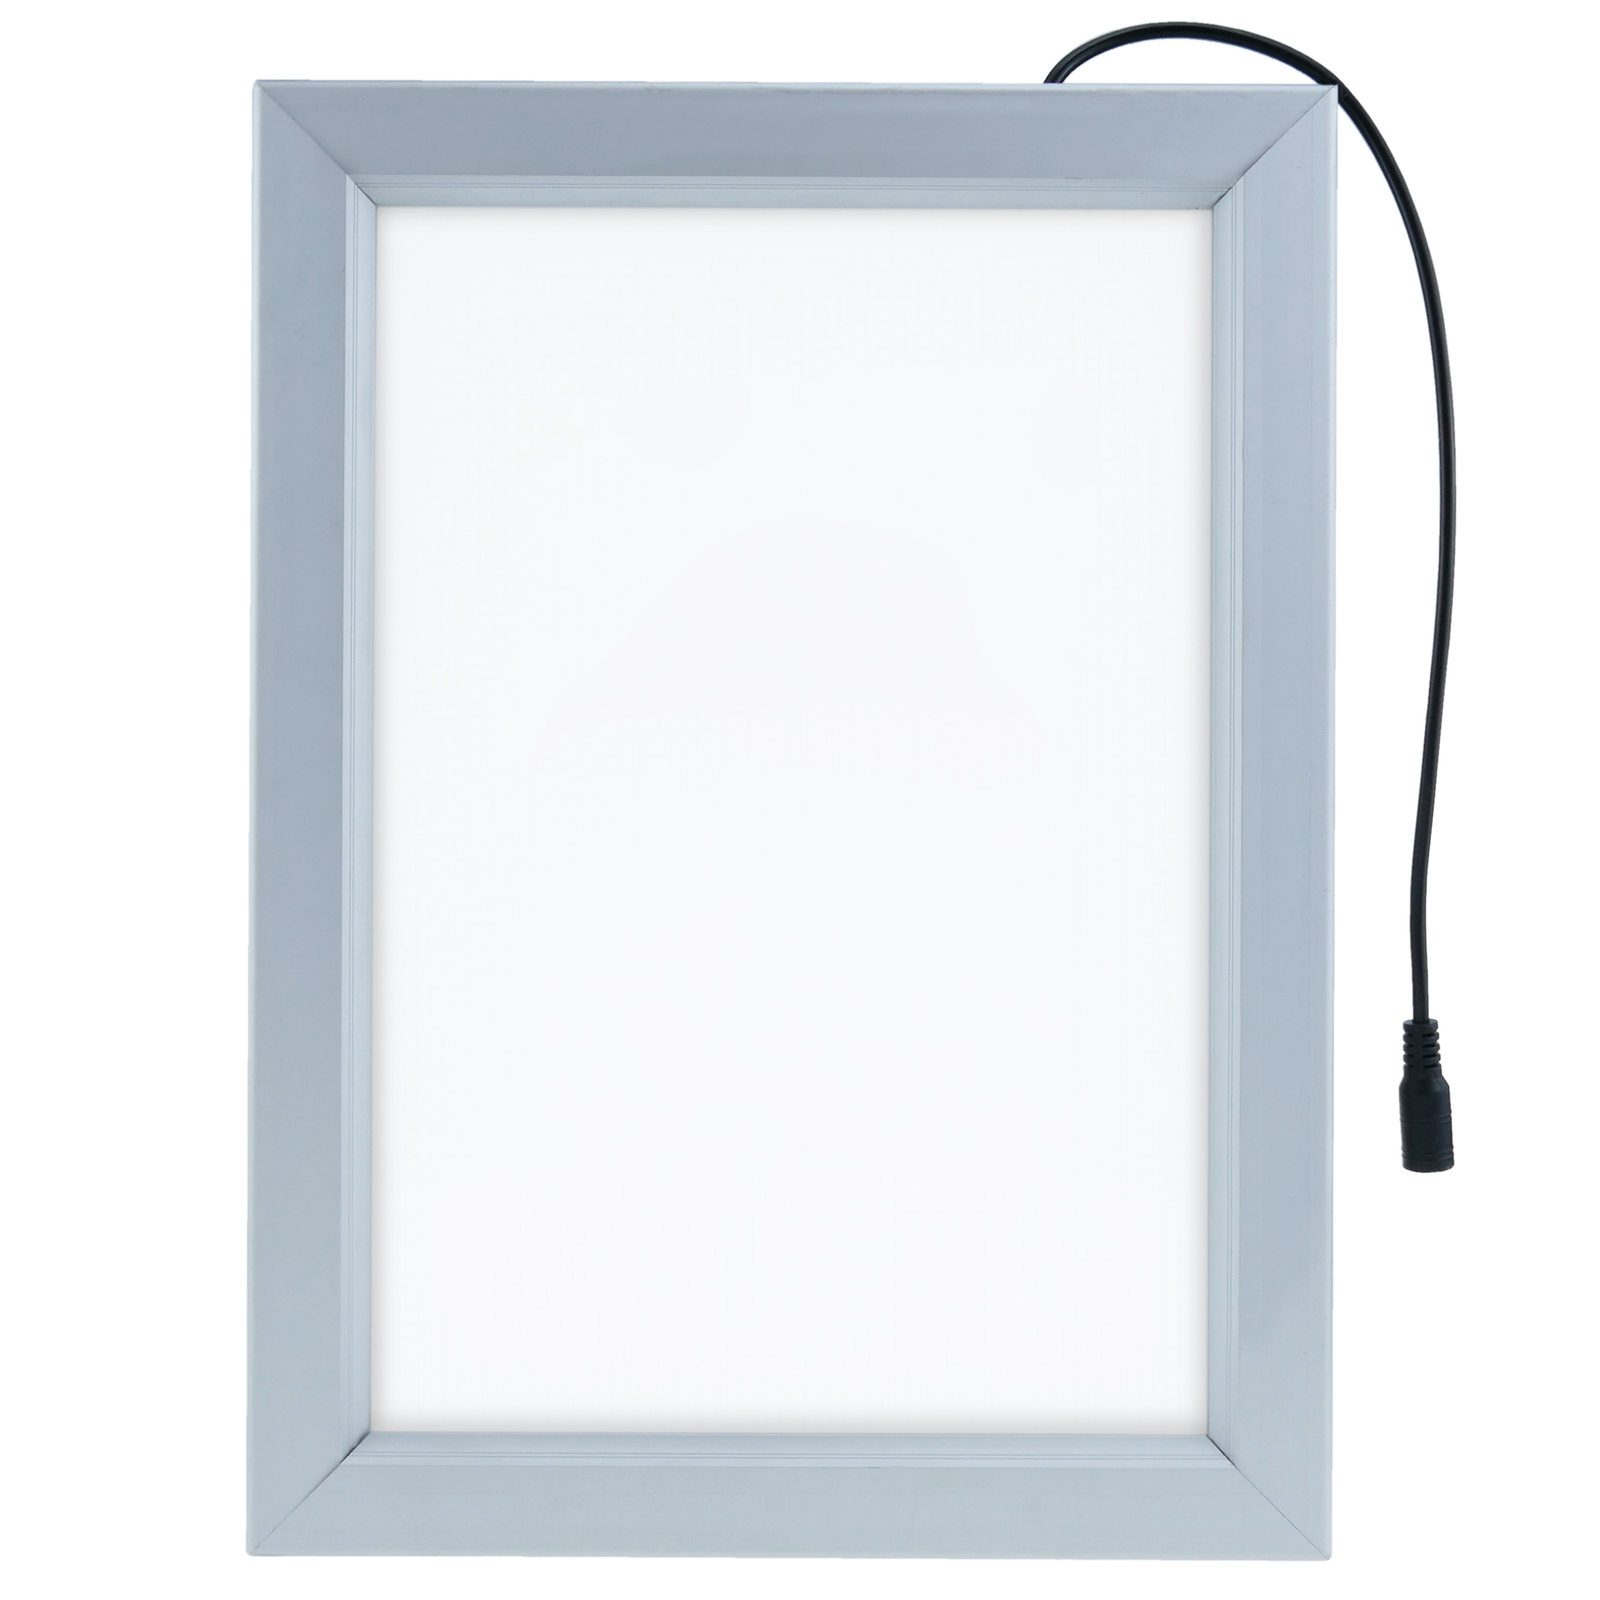 Picture frame 460x635mm illuminated by LED A2 double-sided ad poster sign -  Cablematic